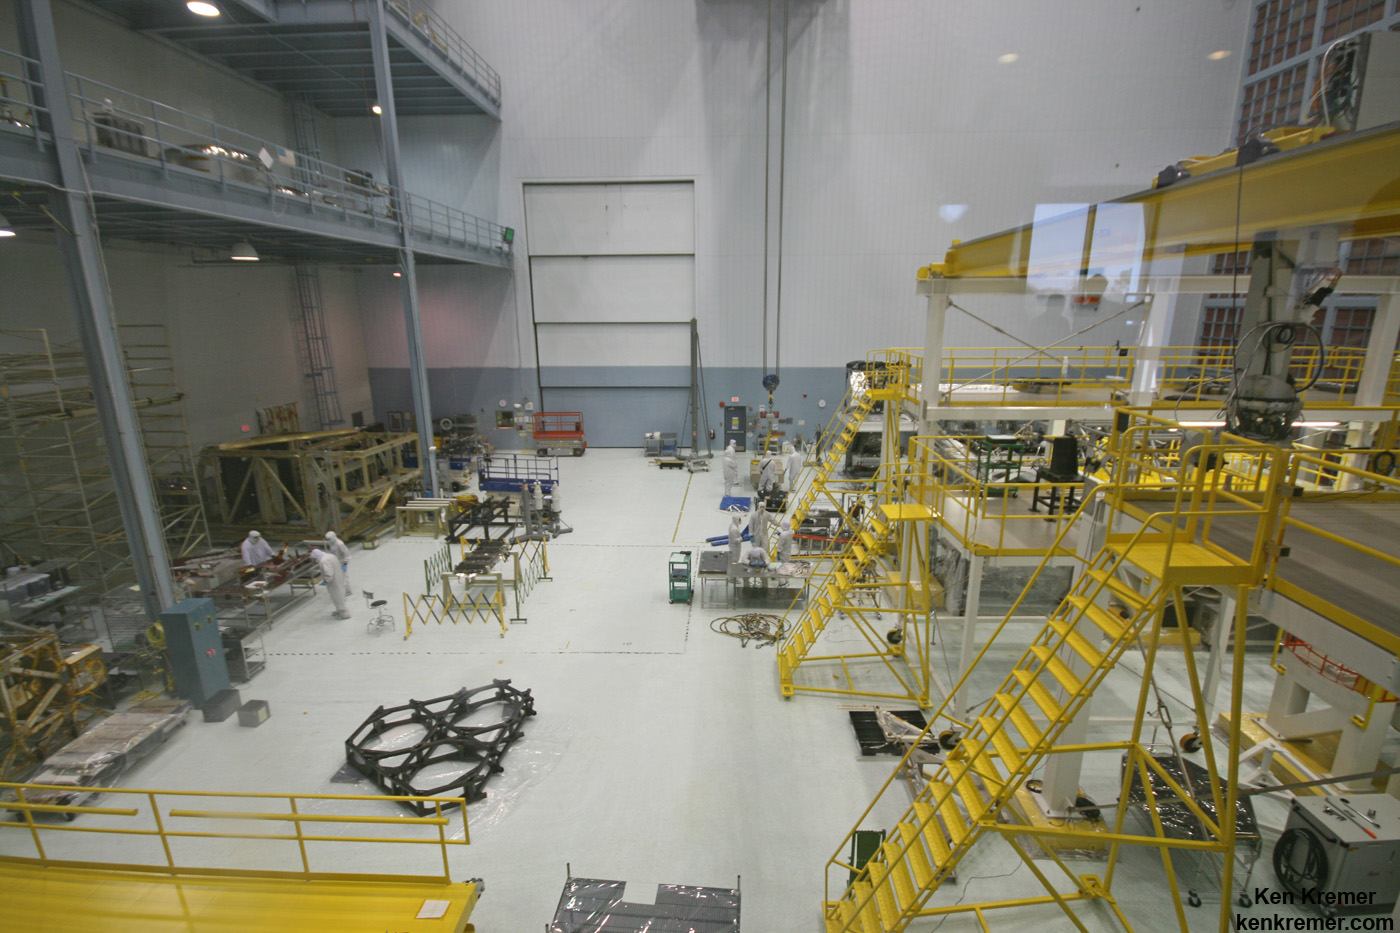 JWST is being assembled here inside the world’s largest clean room at NASA Goddard Space Flight Center, Greenbelt, Md. Primary mirror segments stored in silver colored containers at top left. Technicians practice mirror installation on test piece of backplane (known as the BSTA or Backplane Stability Test Article) at center, 3 hexagonals.  Telescope assembly bays at right.  Credit: Ken Kremer- kenkremer.com